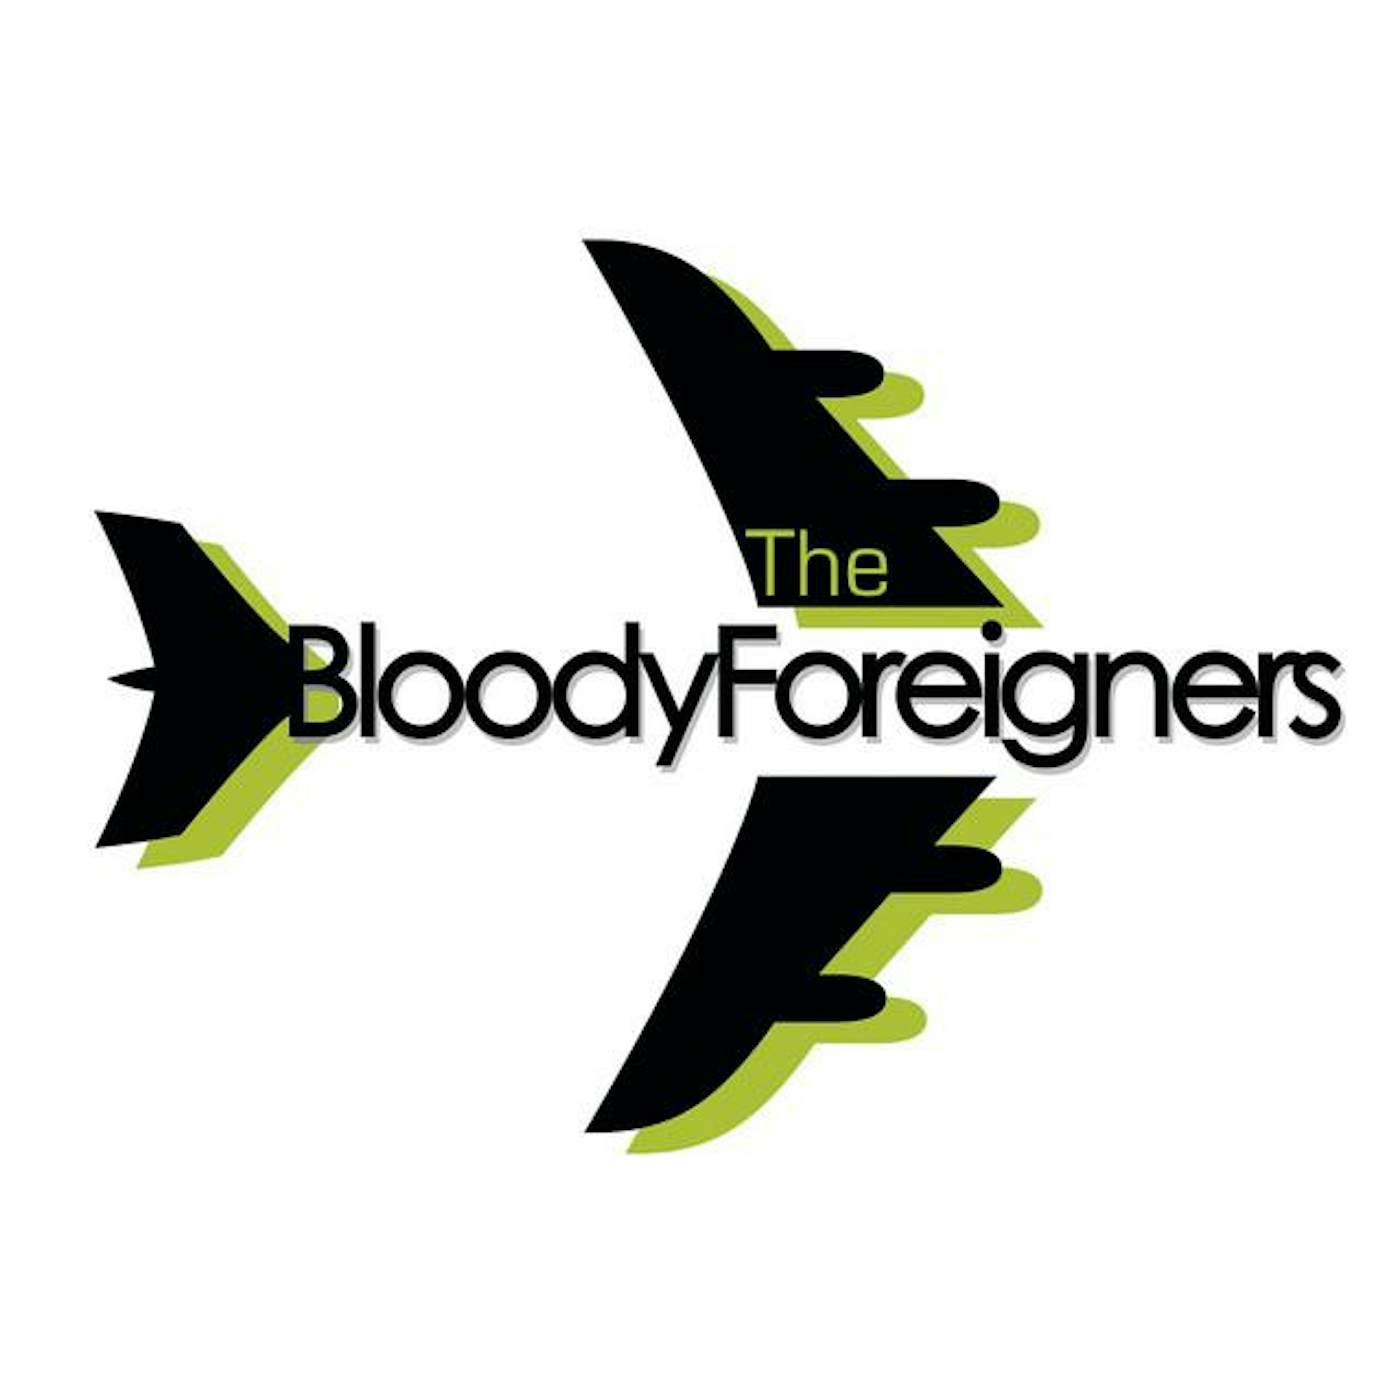 The Bloody Foreigners